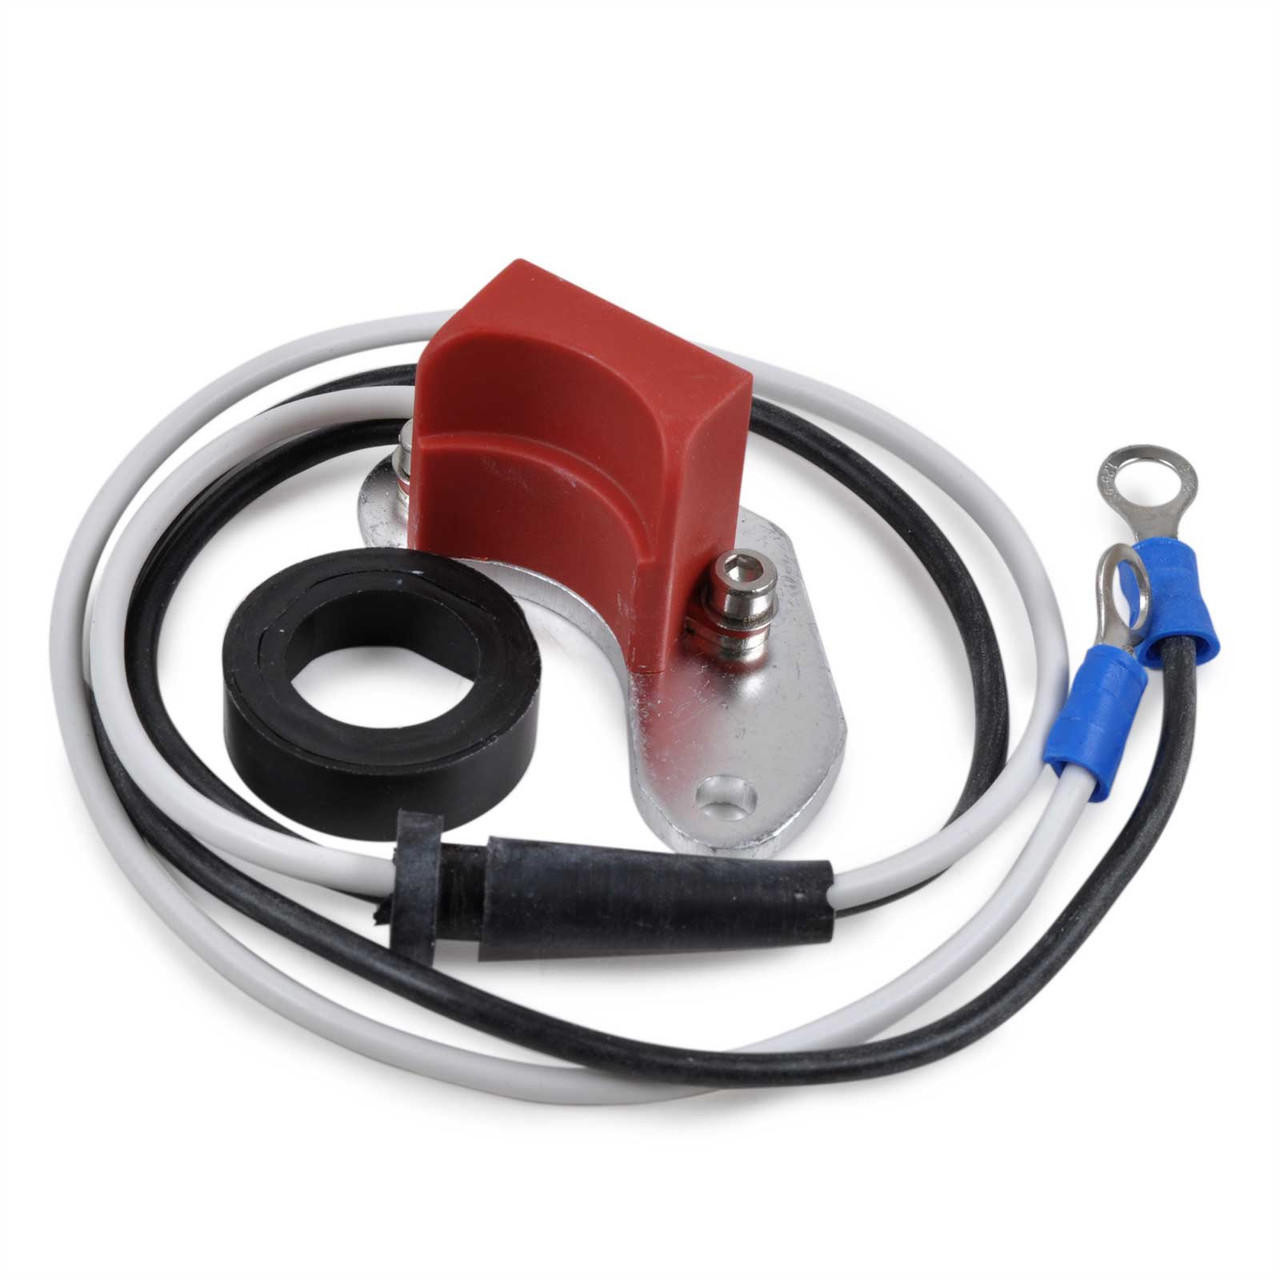 The Benefits of a Performance Ignition Distributor